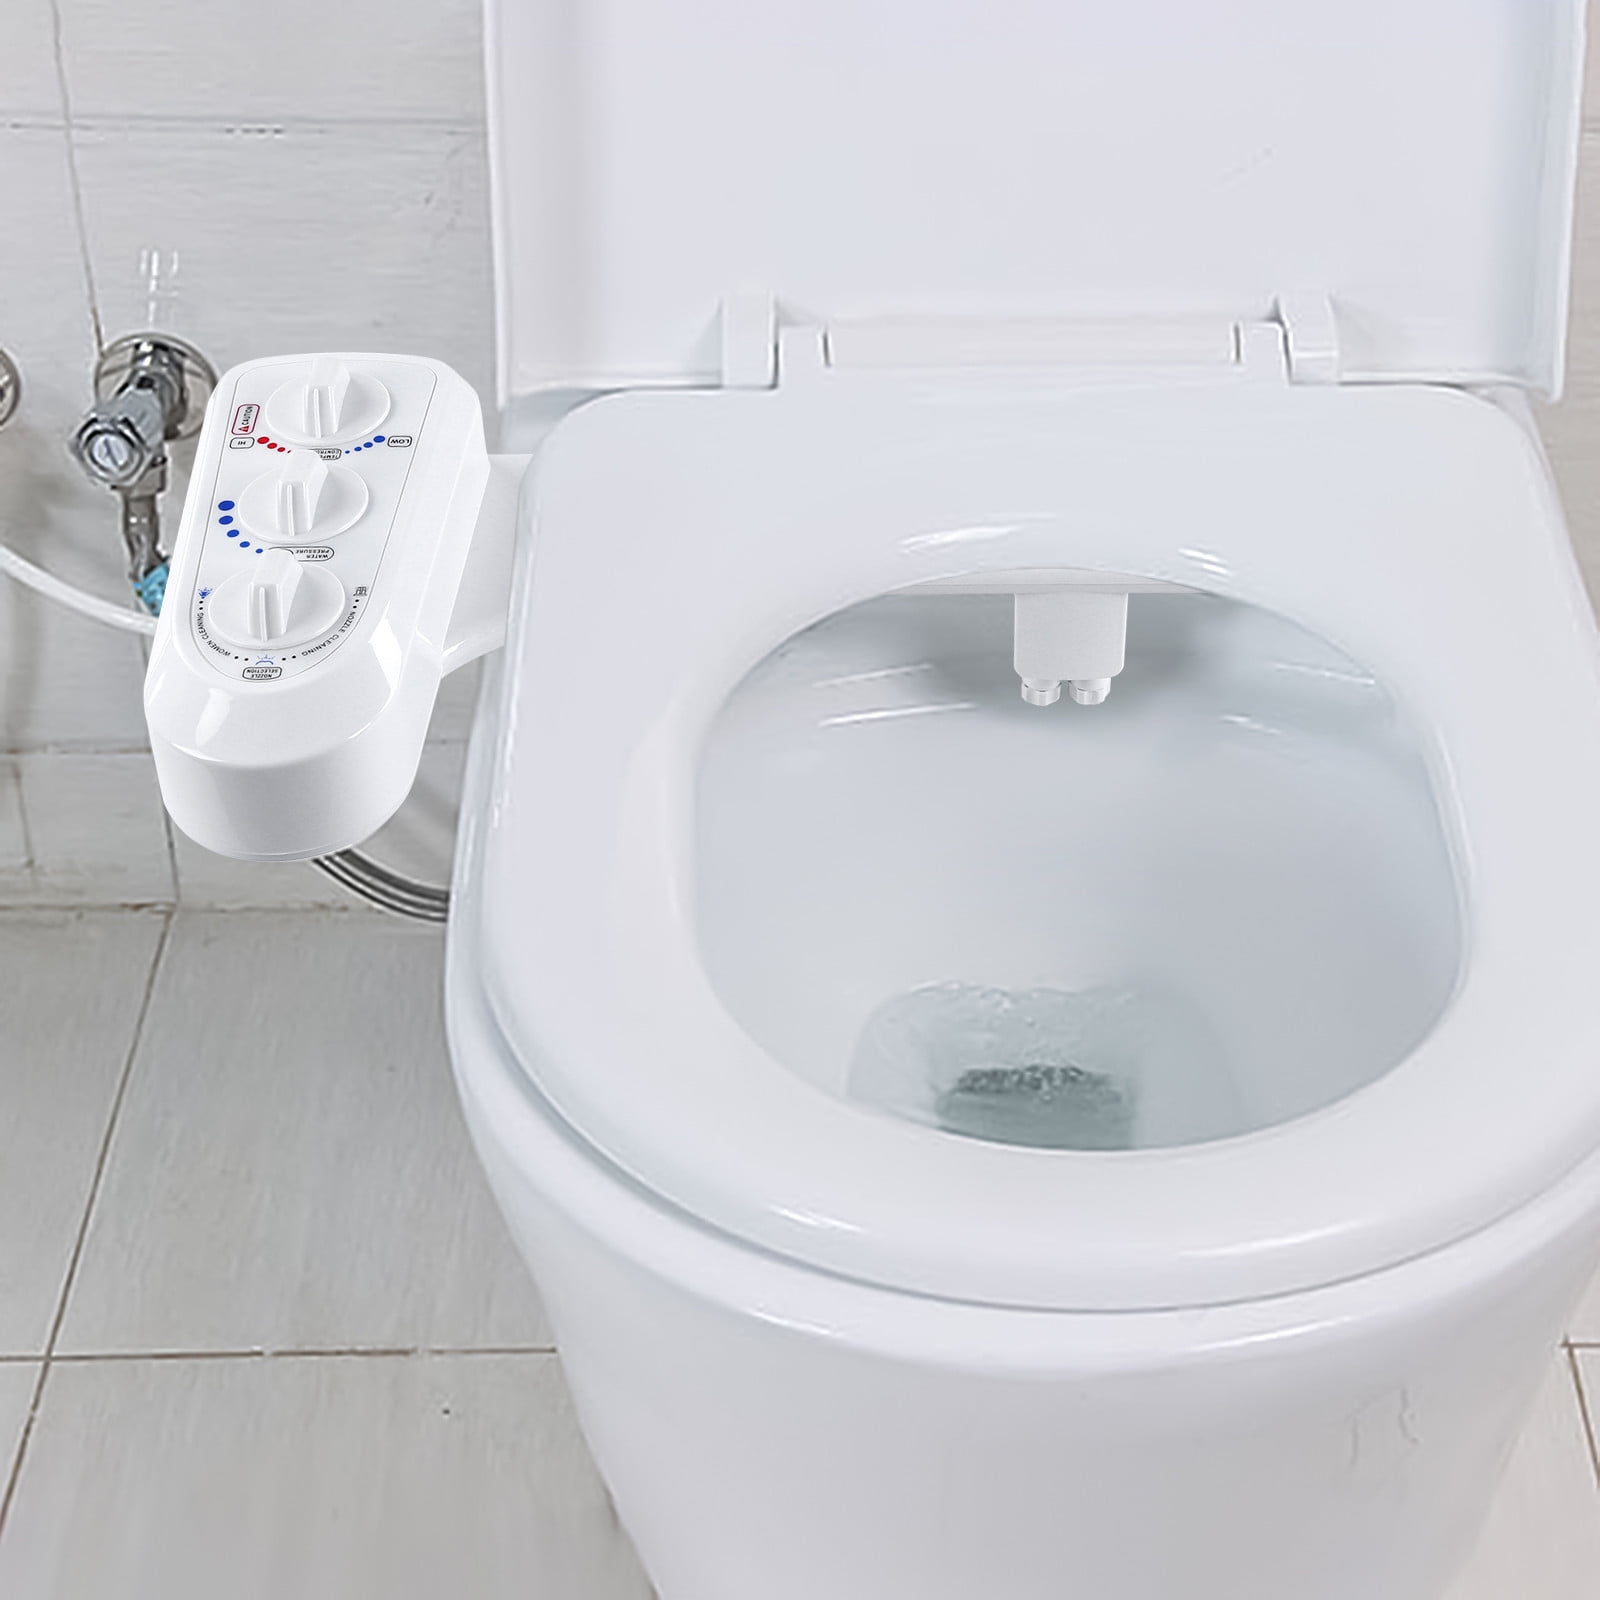 Realhomelove Toilet Seat Bidet with Self Cleaning Dual Nozzle, Hot and Cold  Water Spray Non-Electric Mechanical Bidet Toilet Attachment for Rear or